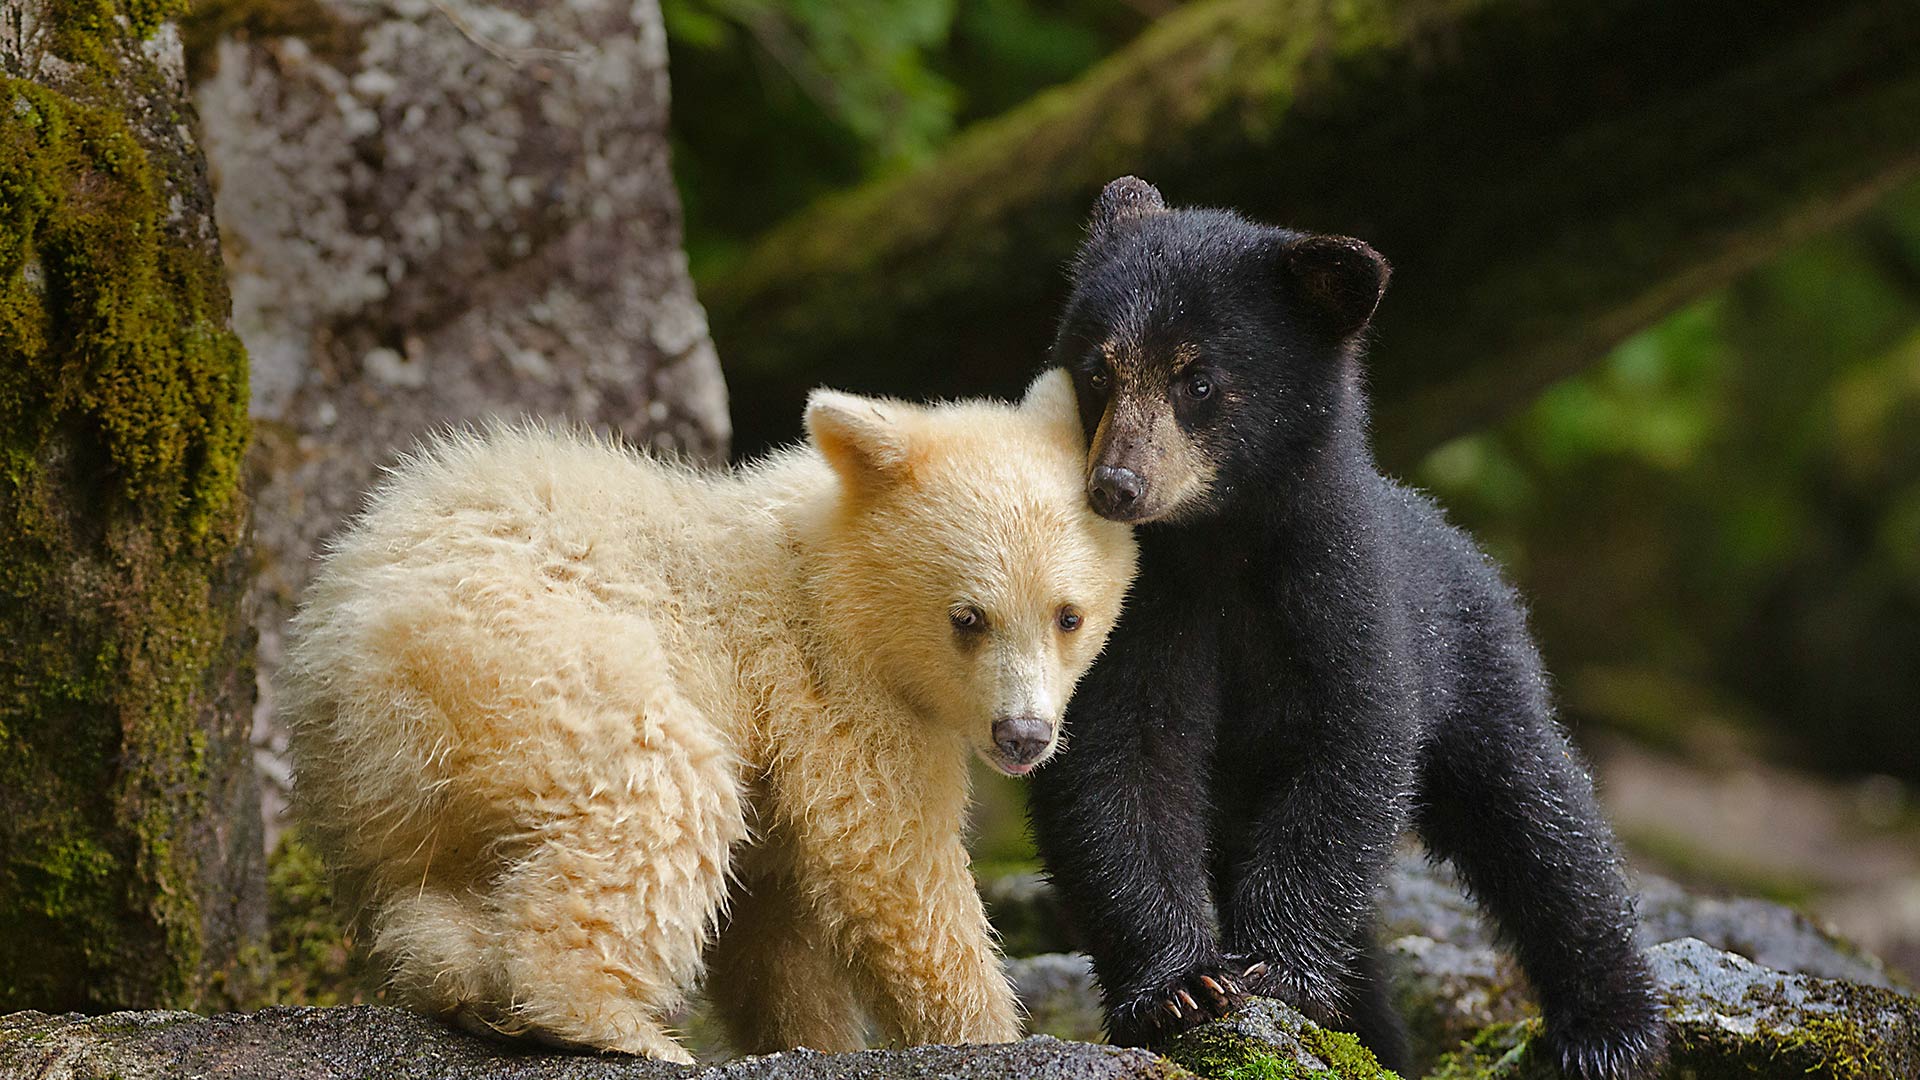 A Kermode bear cub huddling with its sibling in Canada's Great